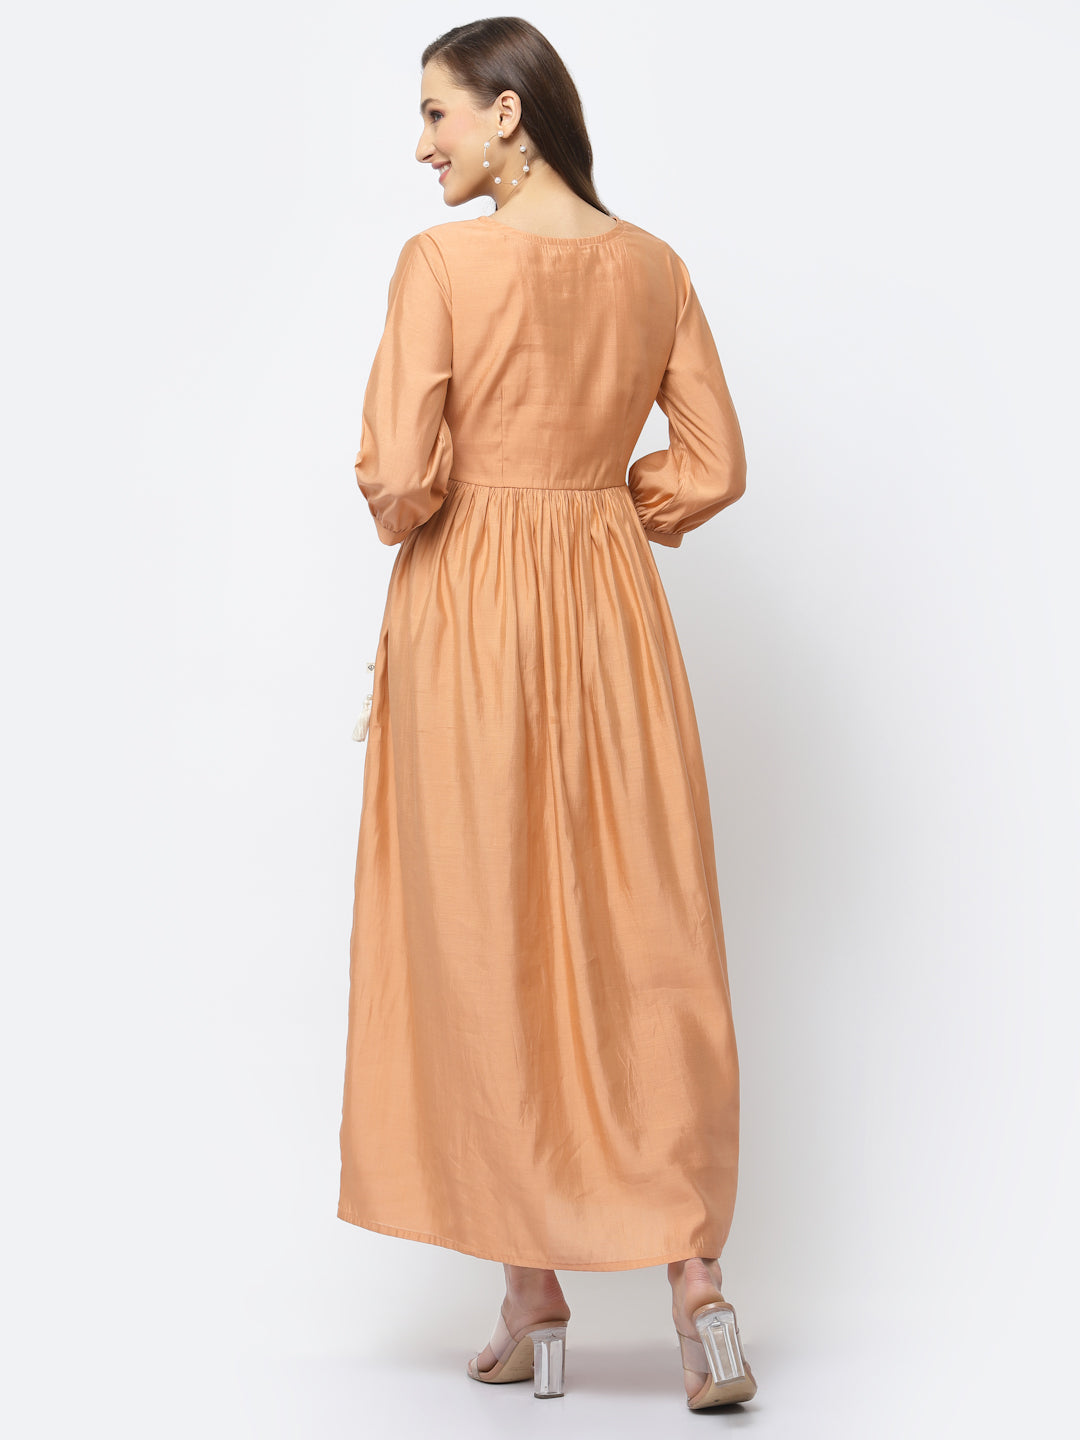 Deep Peach Maxi Flared Dress with Side Pockets and Embroidery Detailing - ARH1482